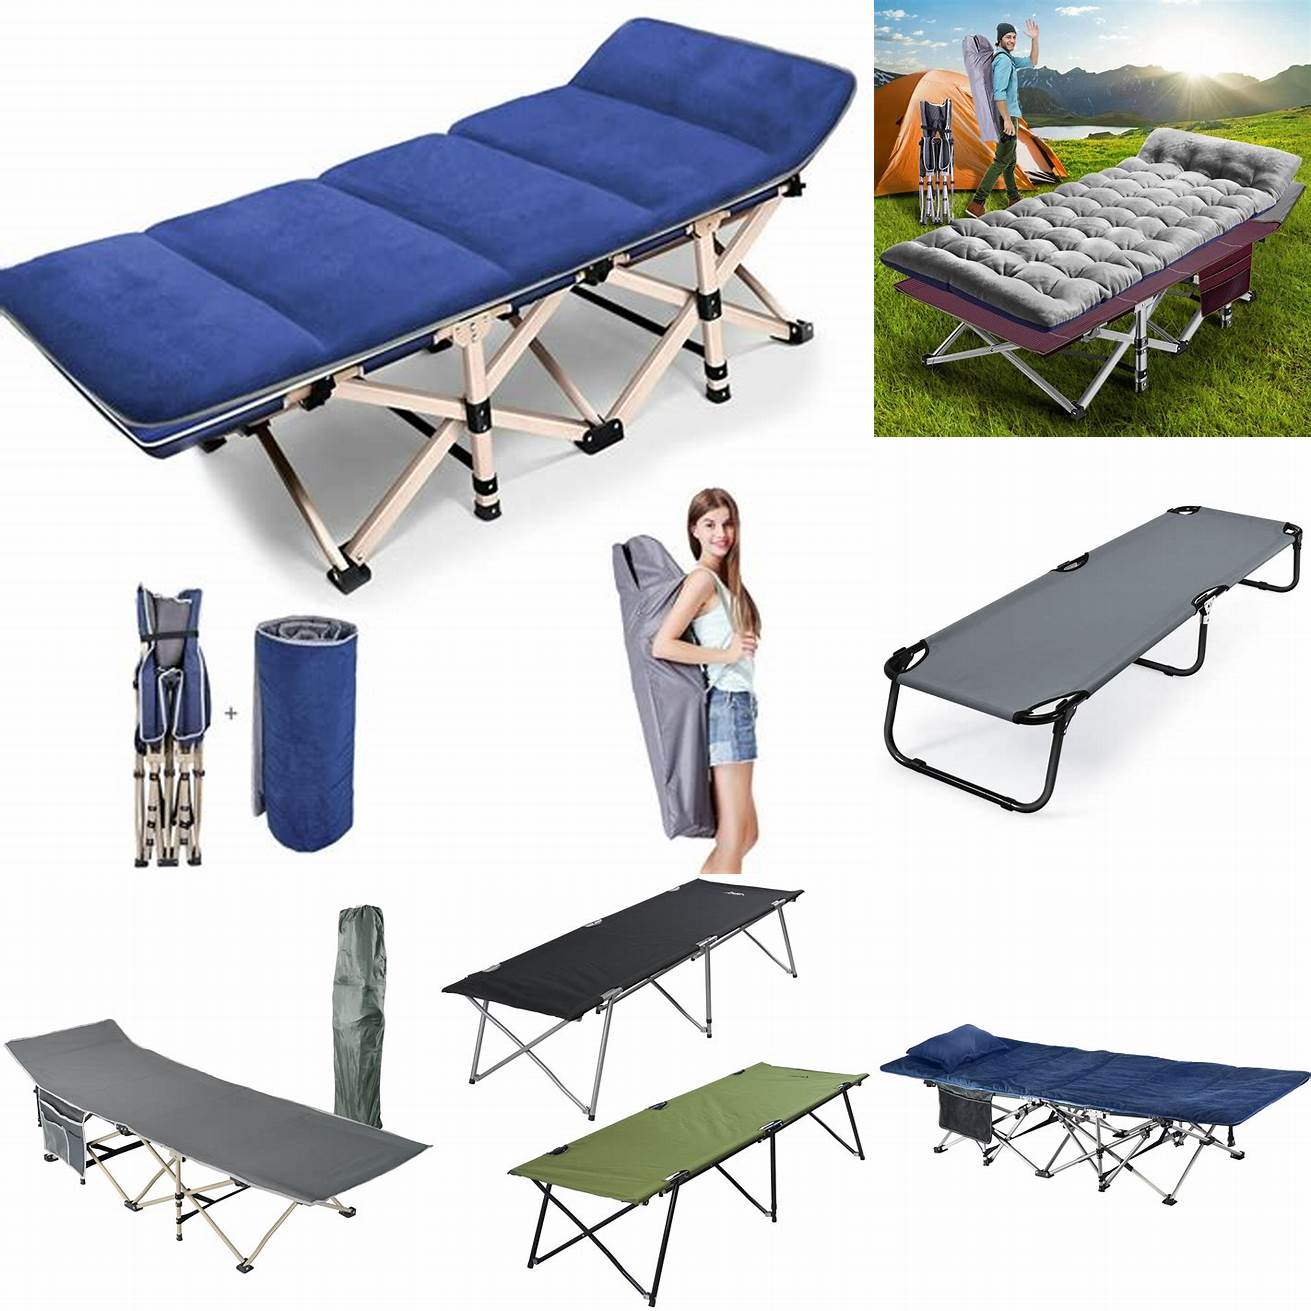 Portable bed for camping